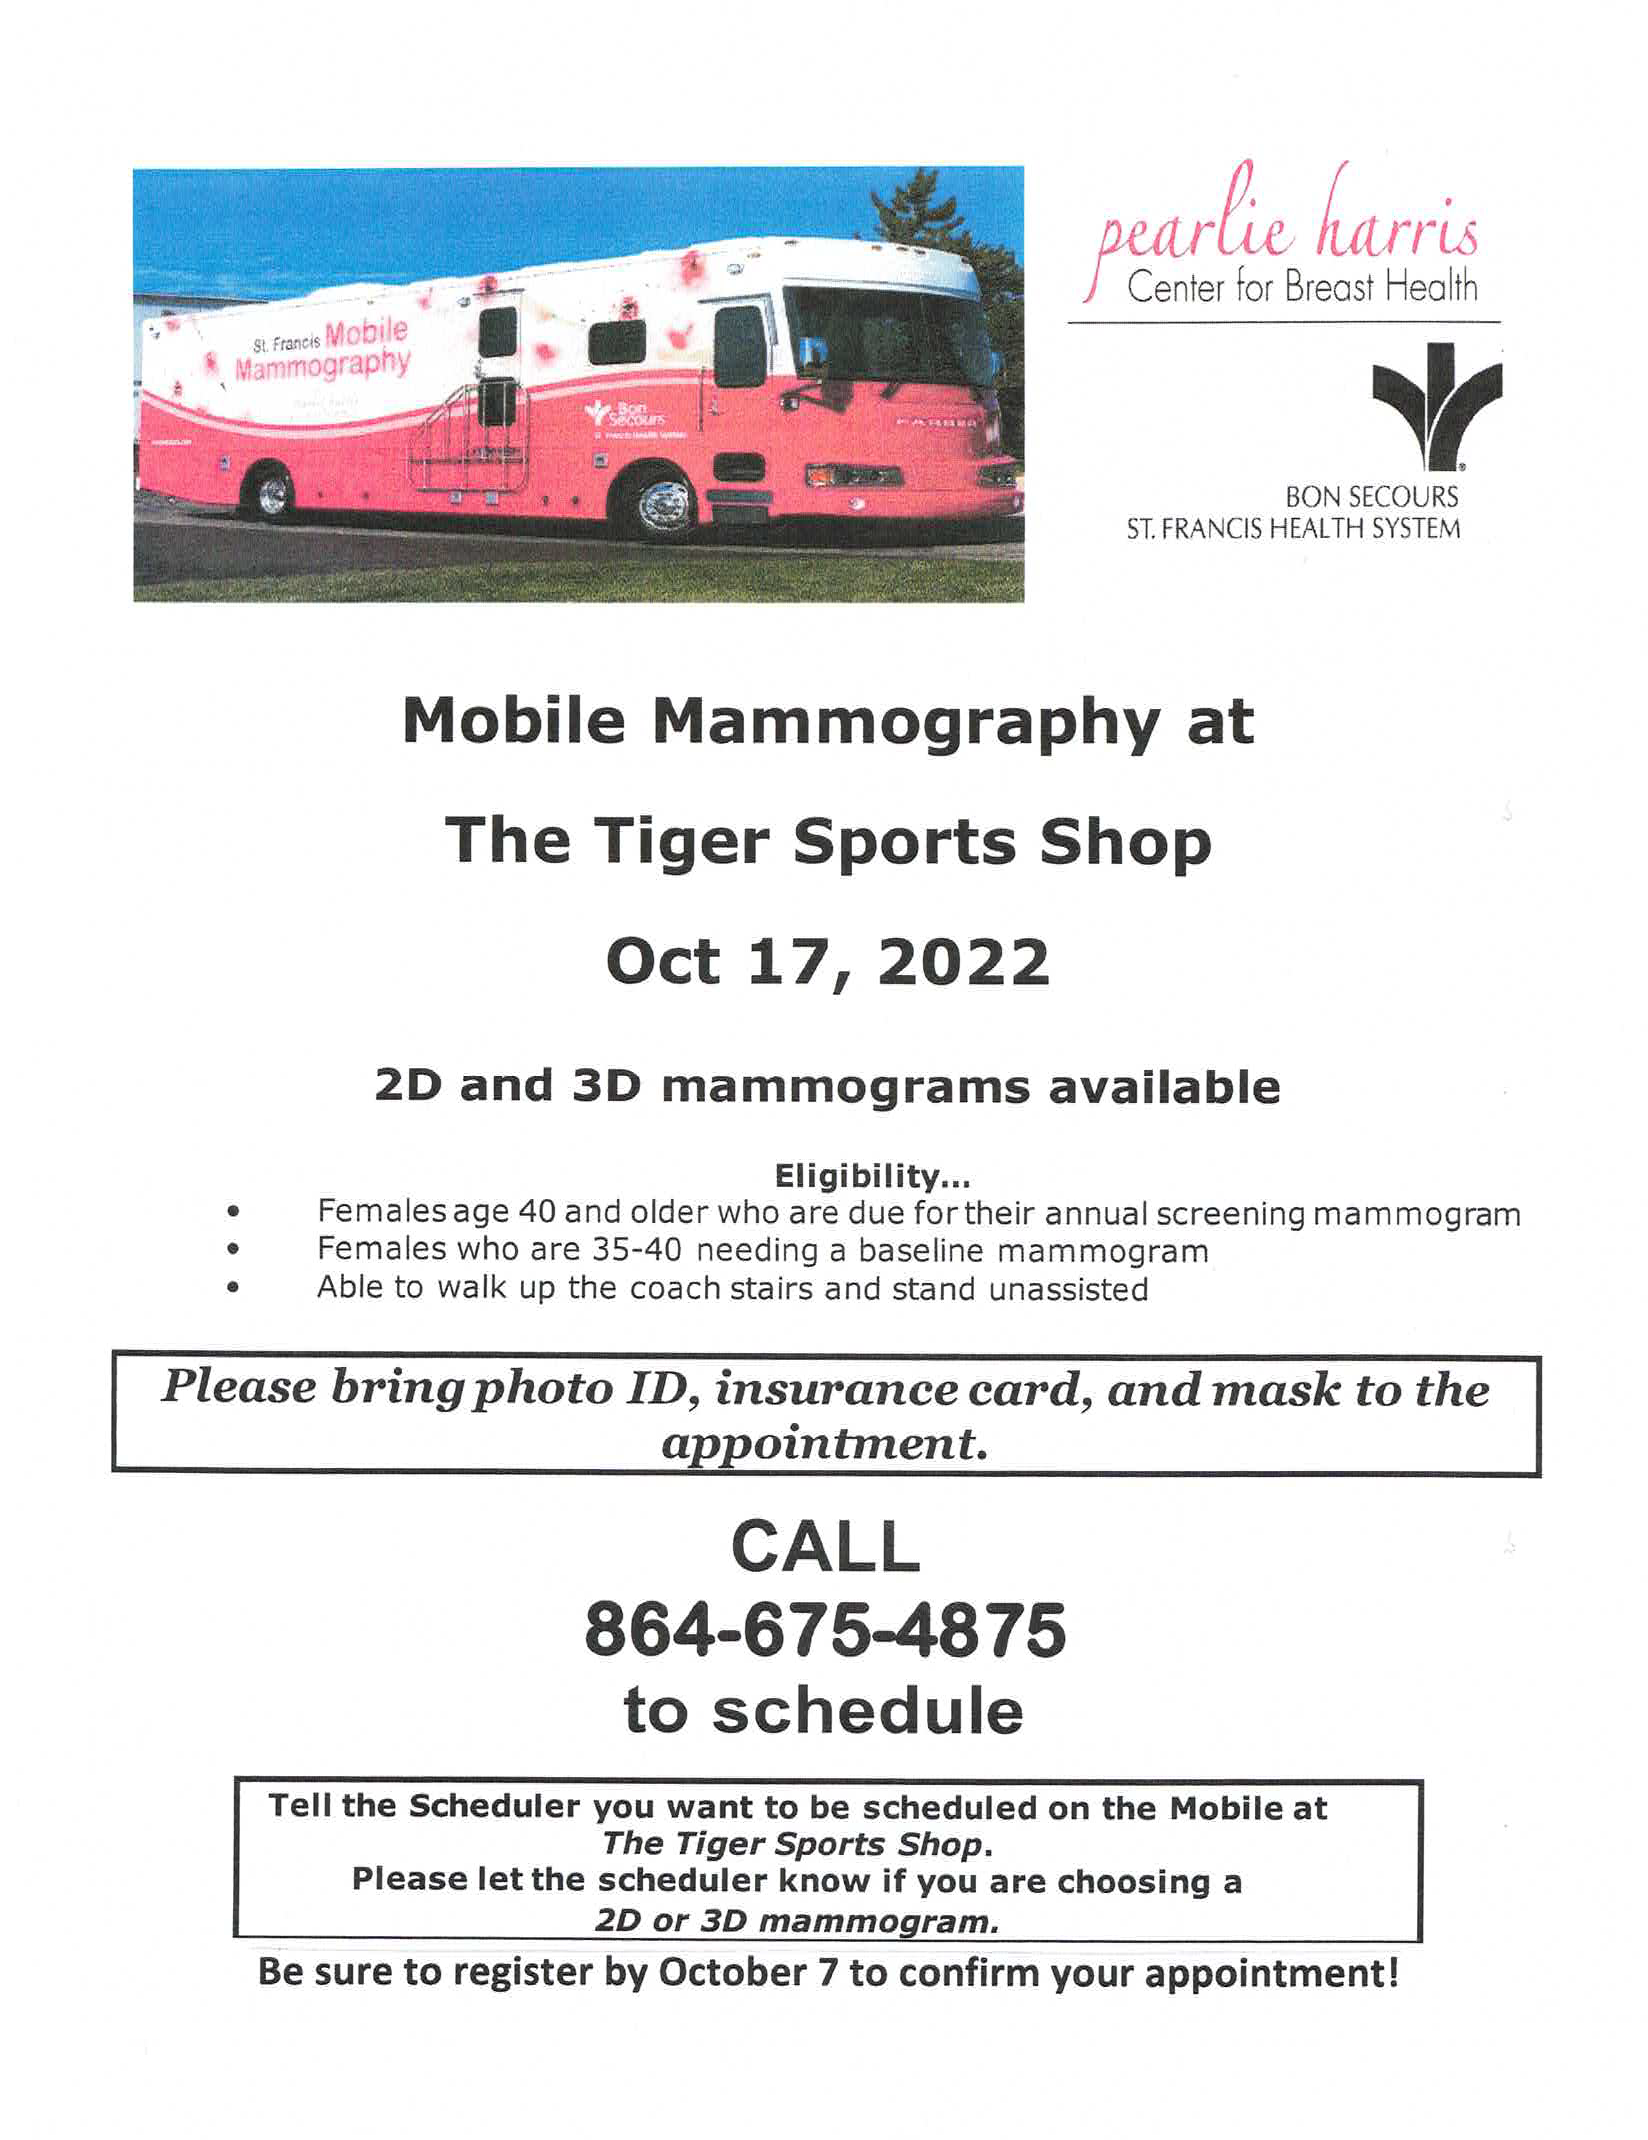 Mobile Mammography Bus at Tiger Sports Shop October 17th